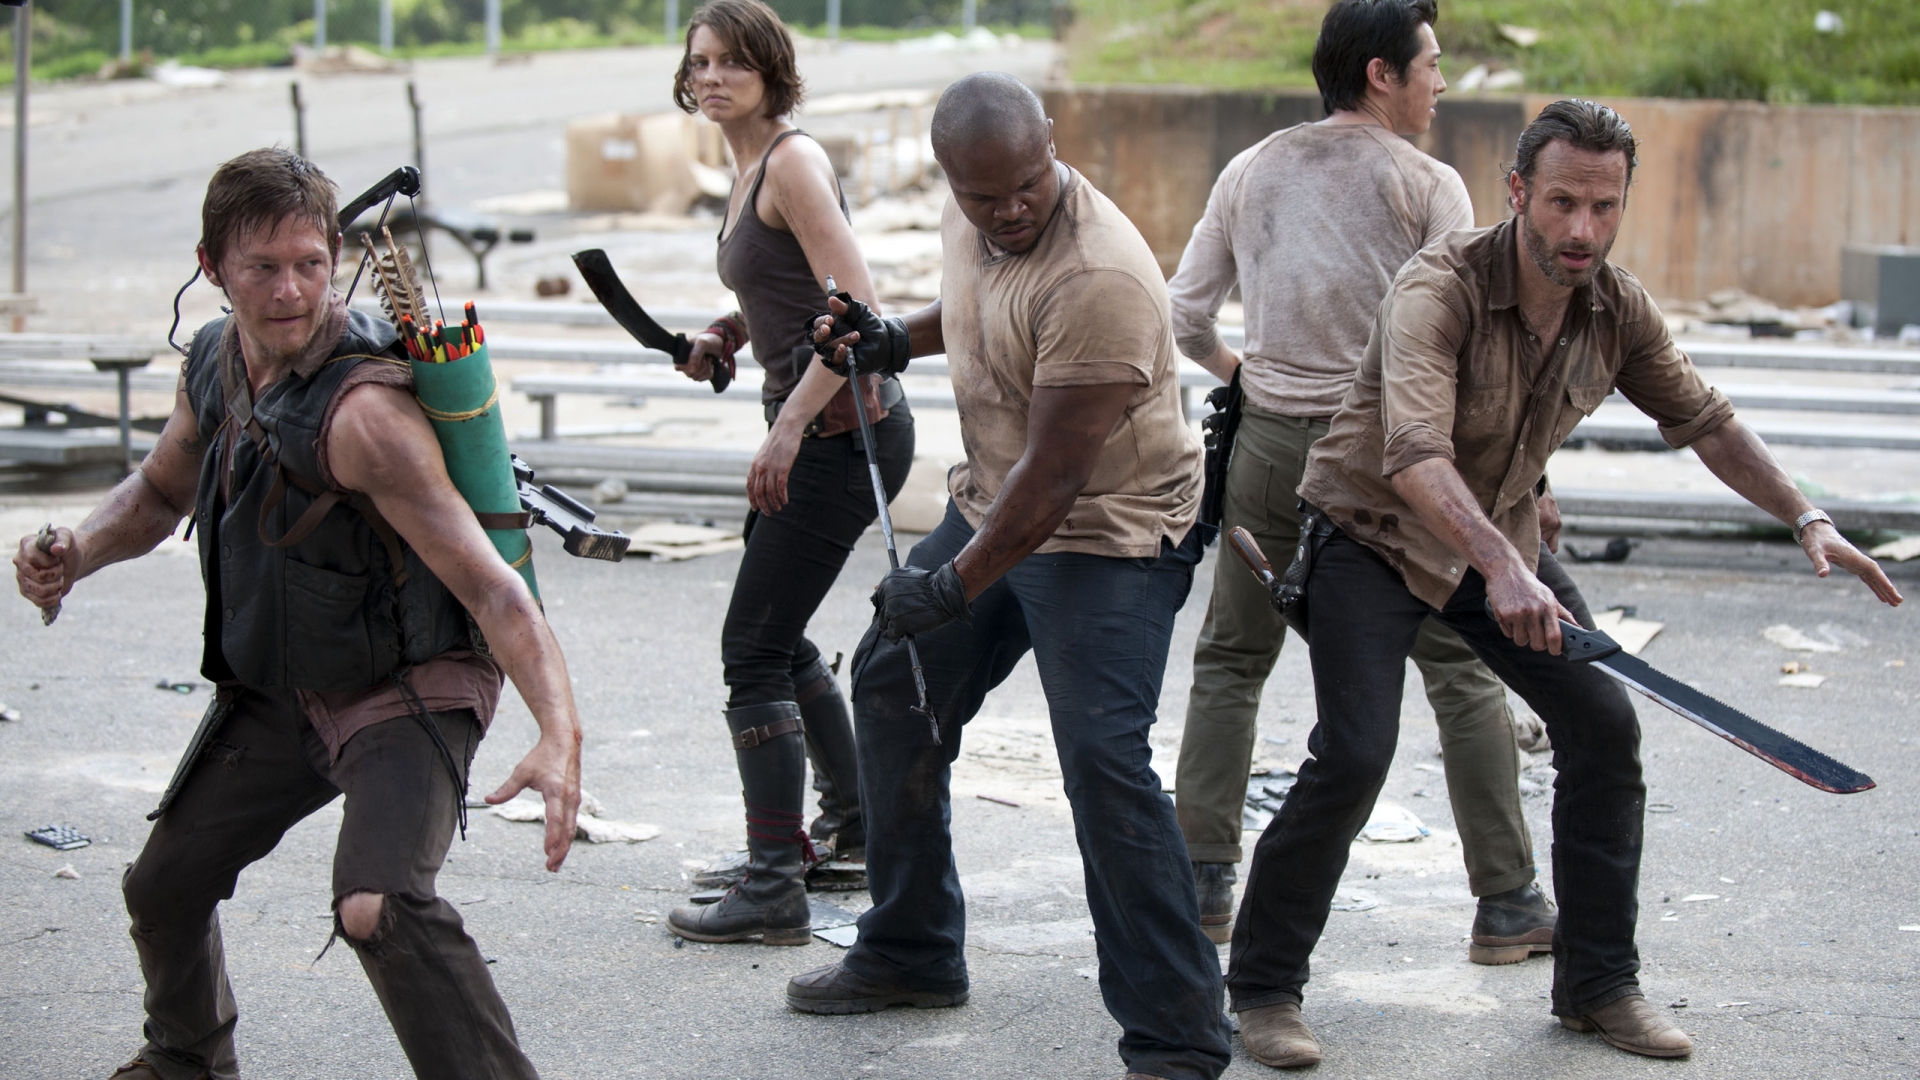 The Walking Dead Cast for 1920 x 1080 HDTV 1080p resolution